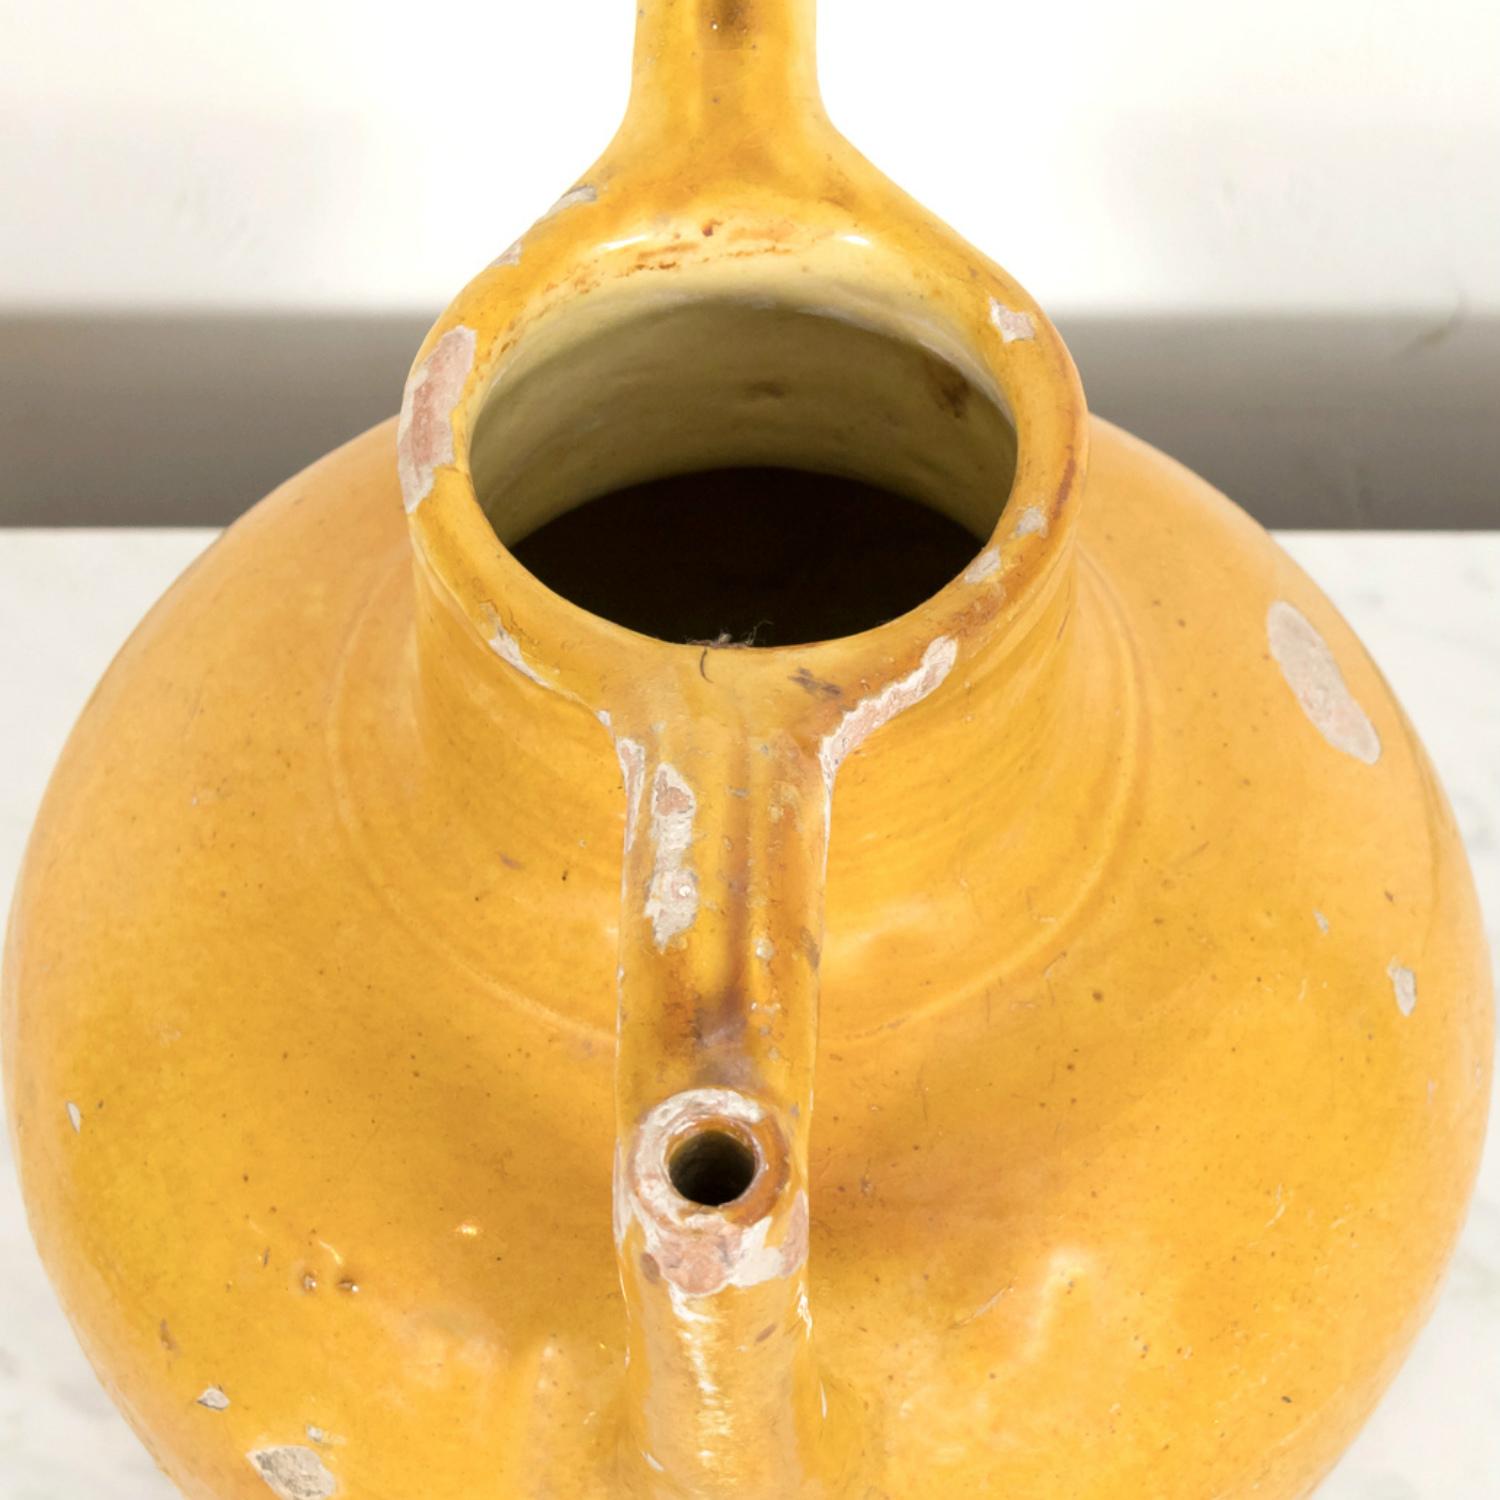 19th Century Antique French Cruche Orjol or Water Jug with Mustard Yellow Glaze For Sale 4